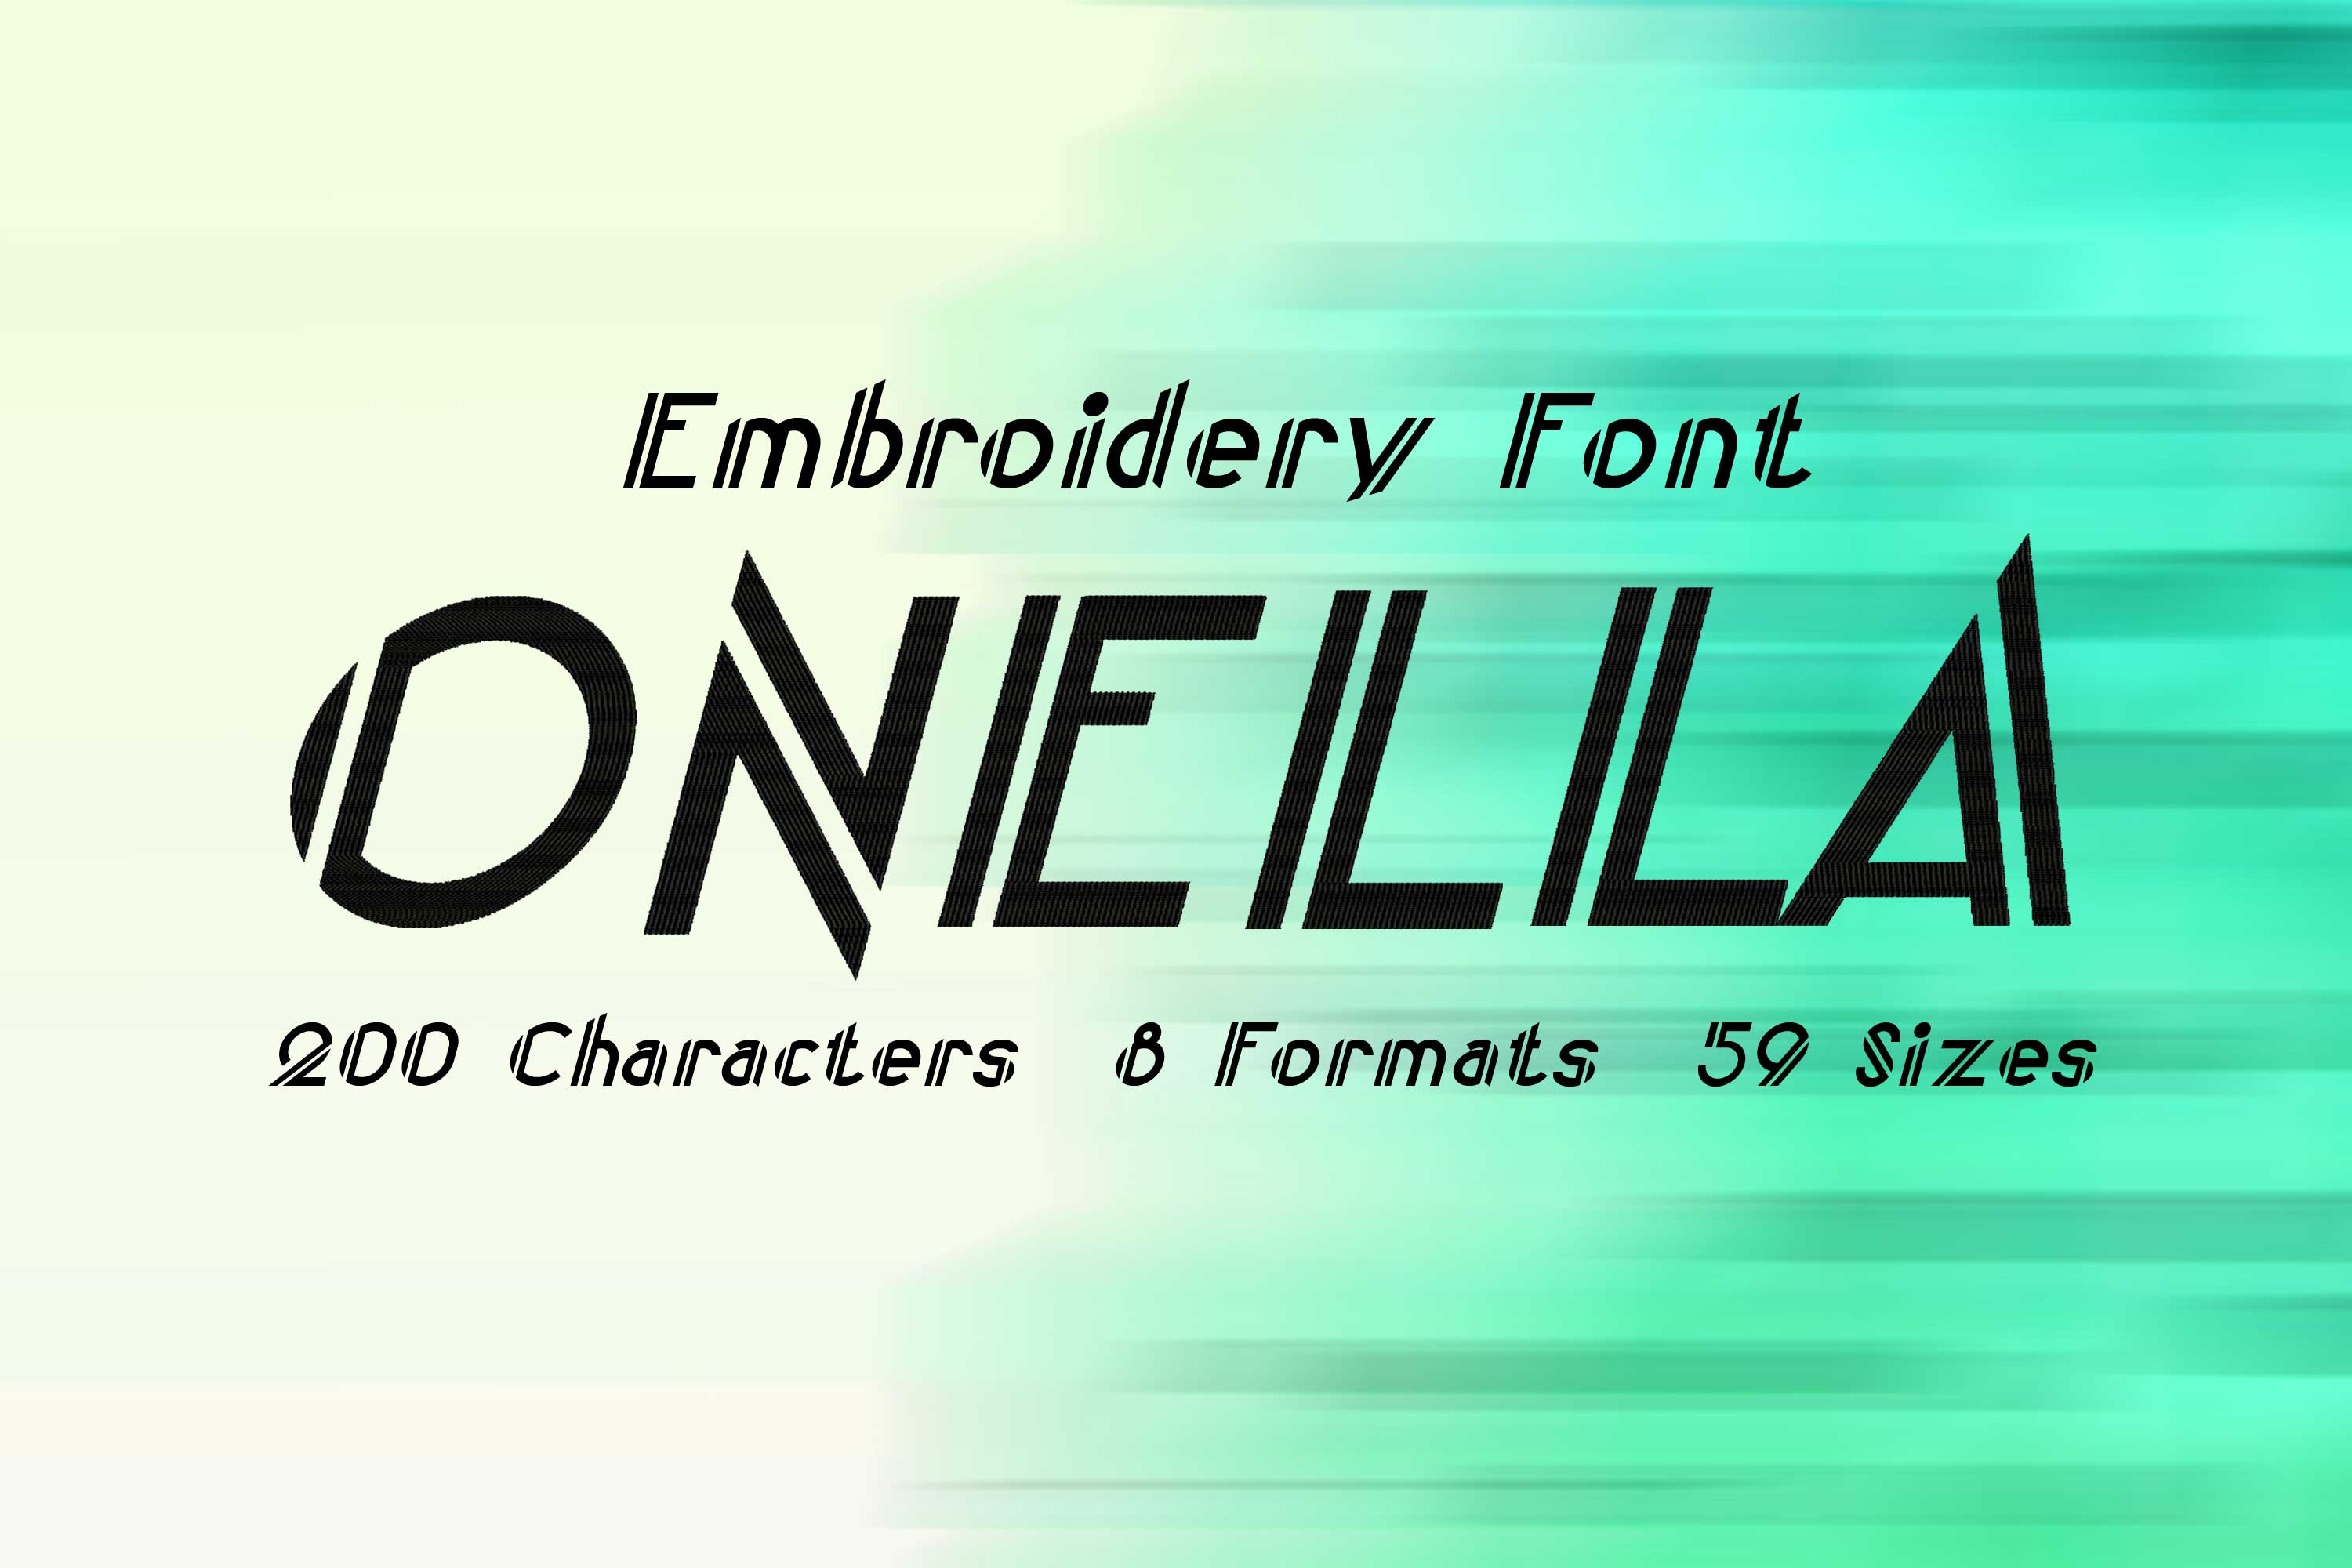 Onella Lined Italic Typeface